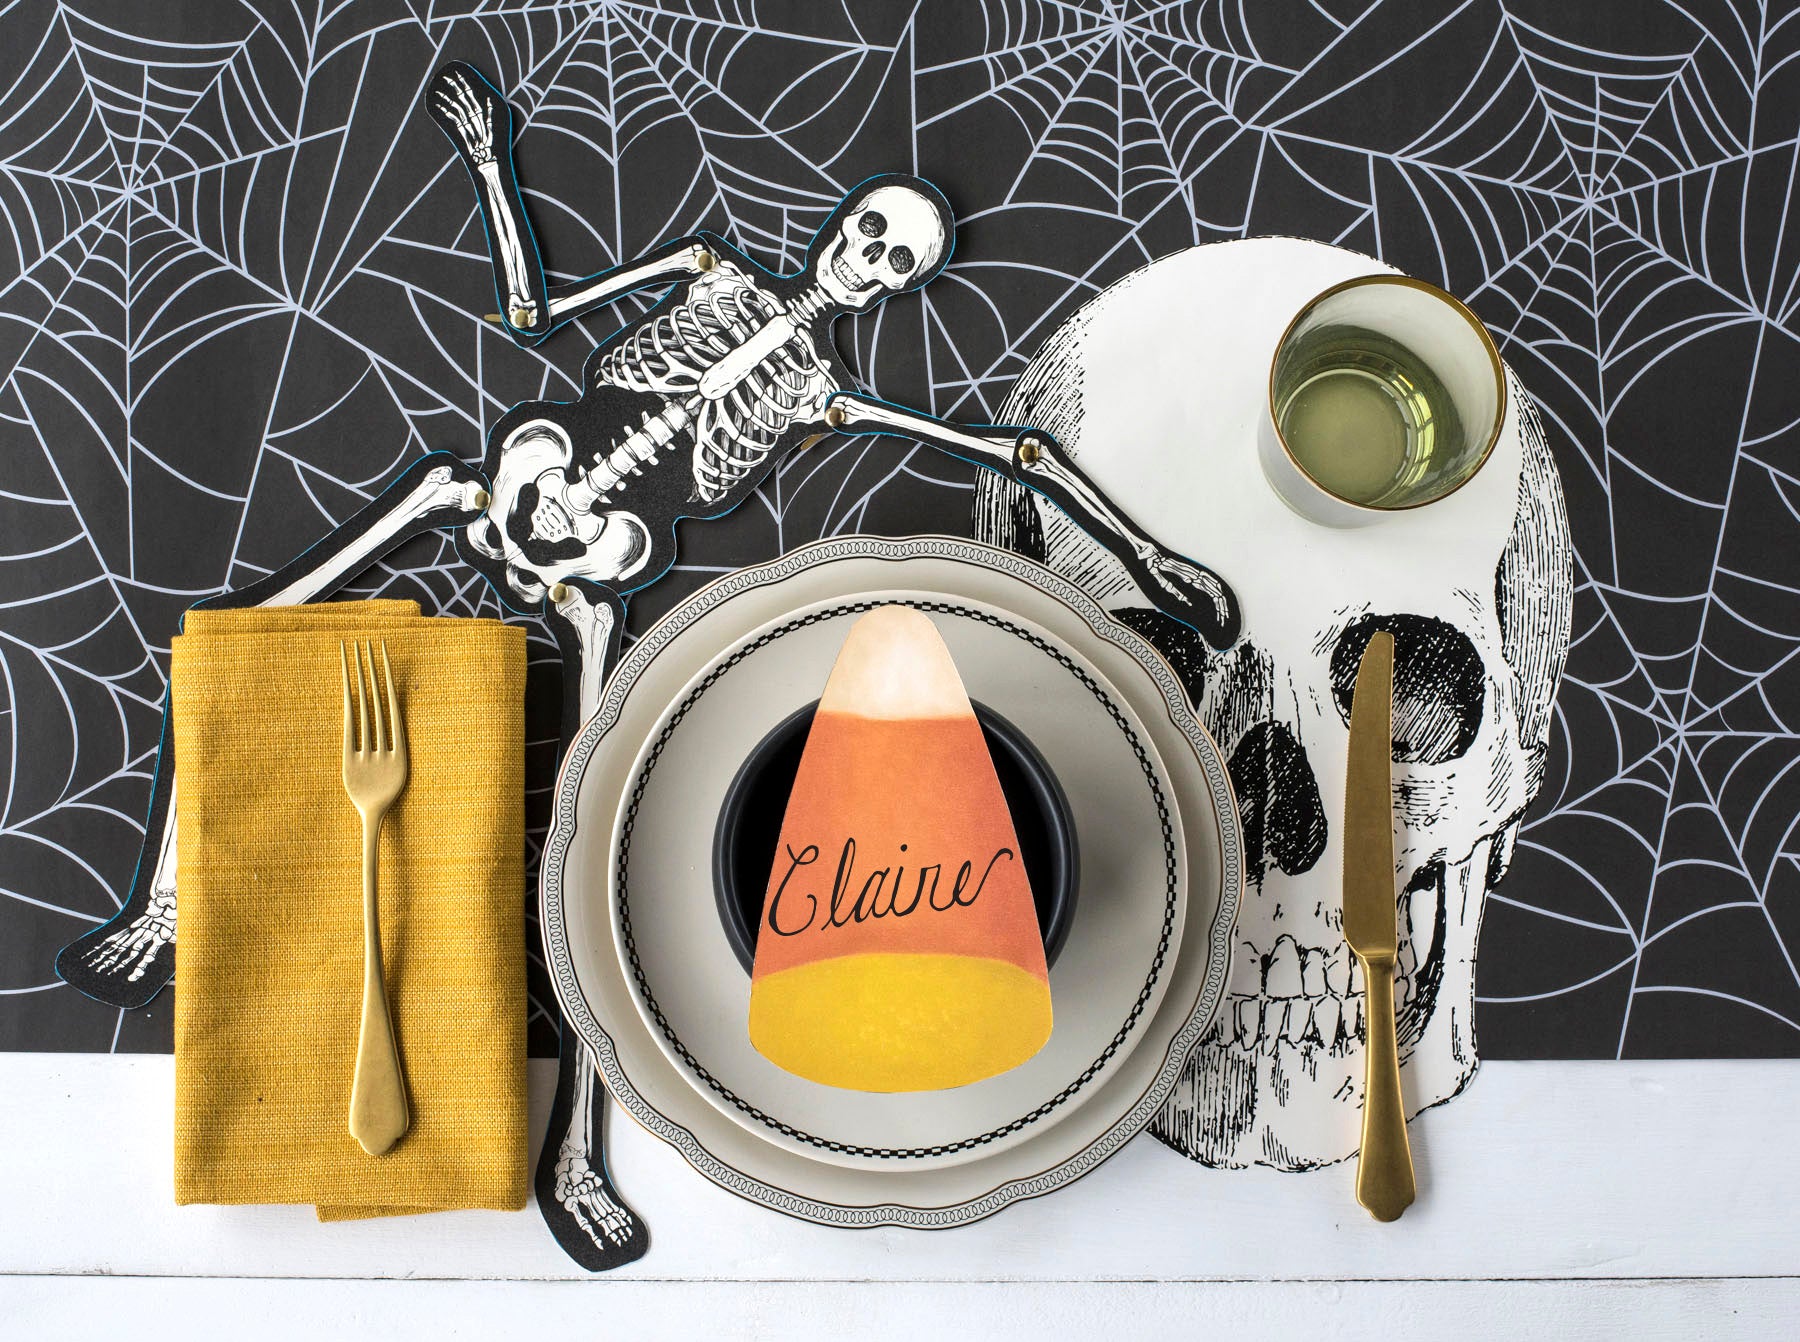 A spooky Halloween place setting featuring an Articulated Skeleton Decorative Accent on the table with its arm around the plate.